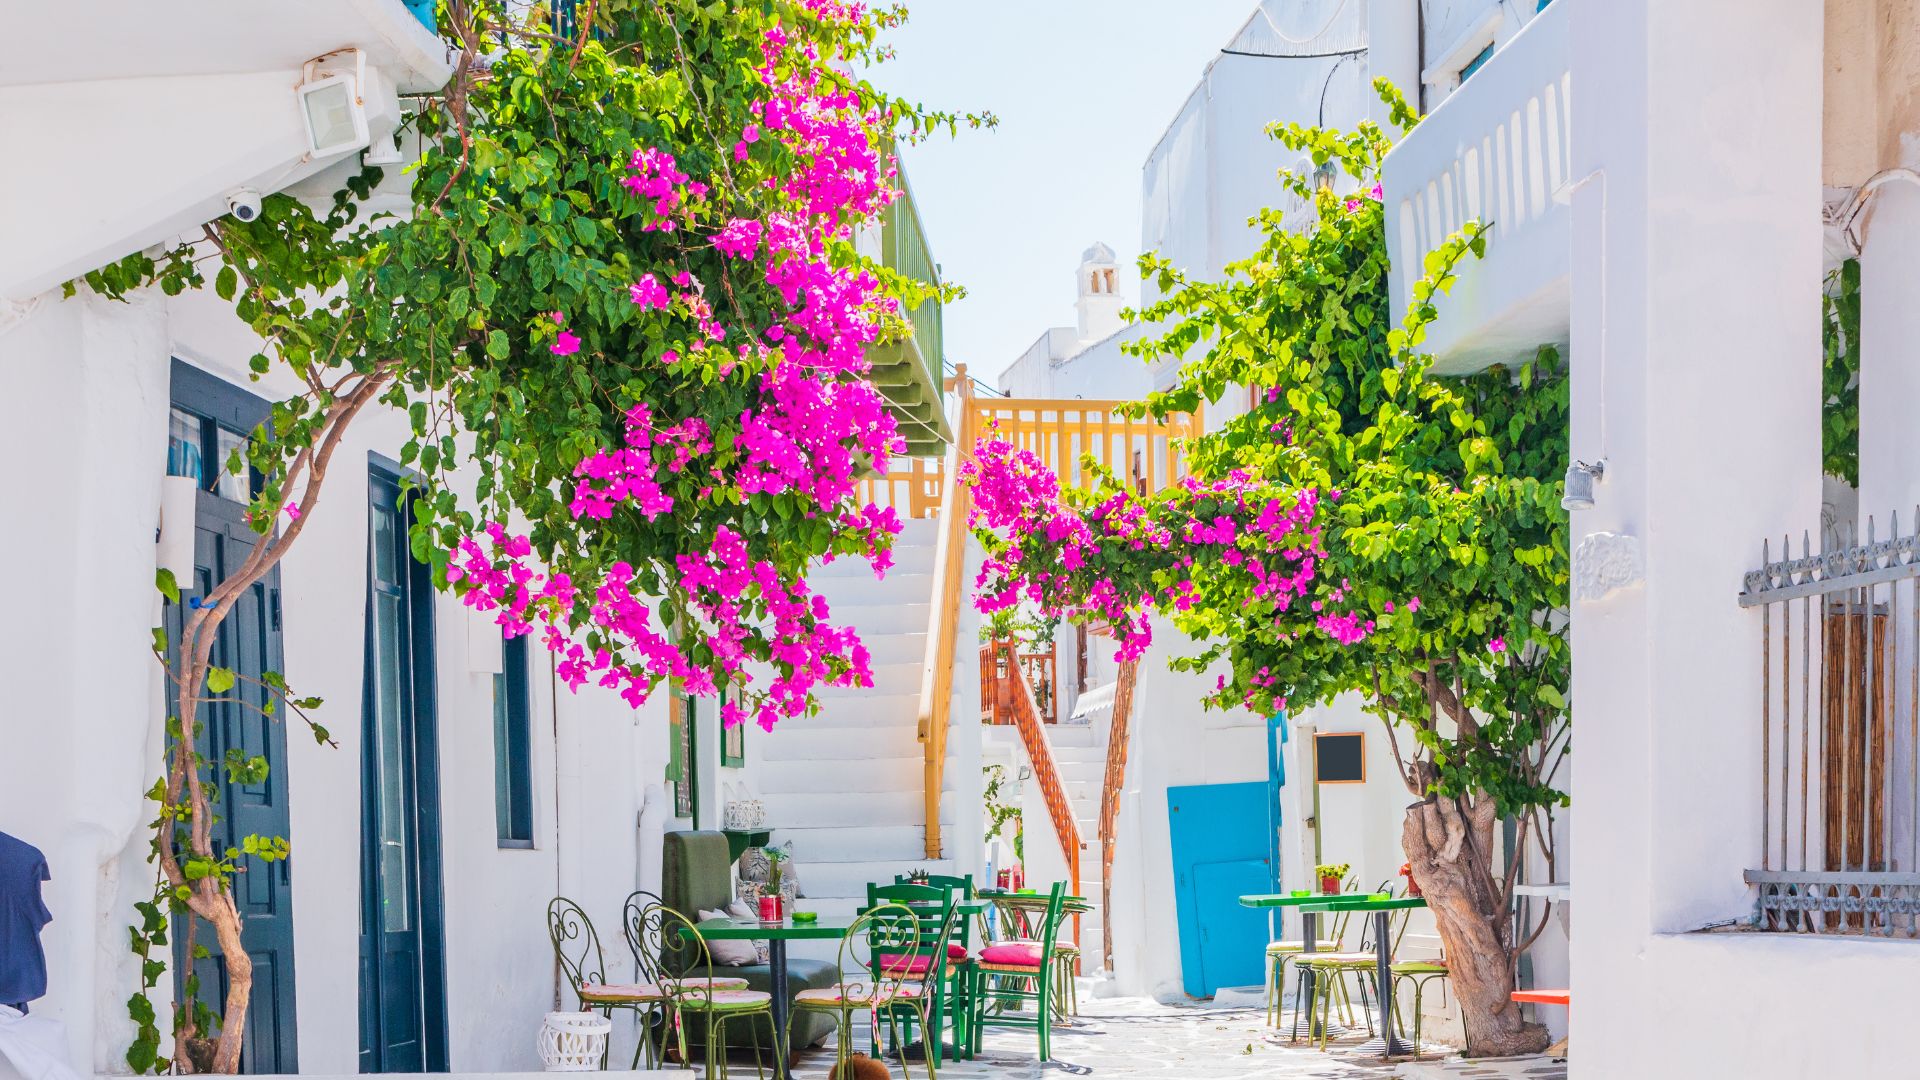 Mykonos, a party island or shoppers' paradise?